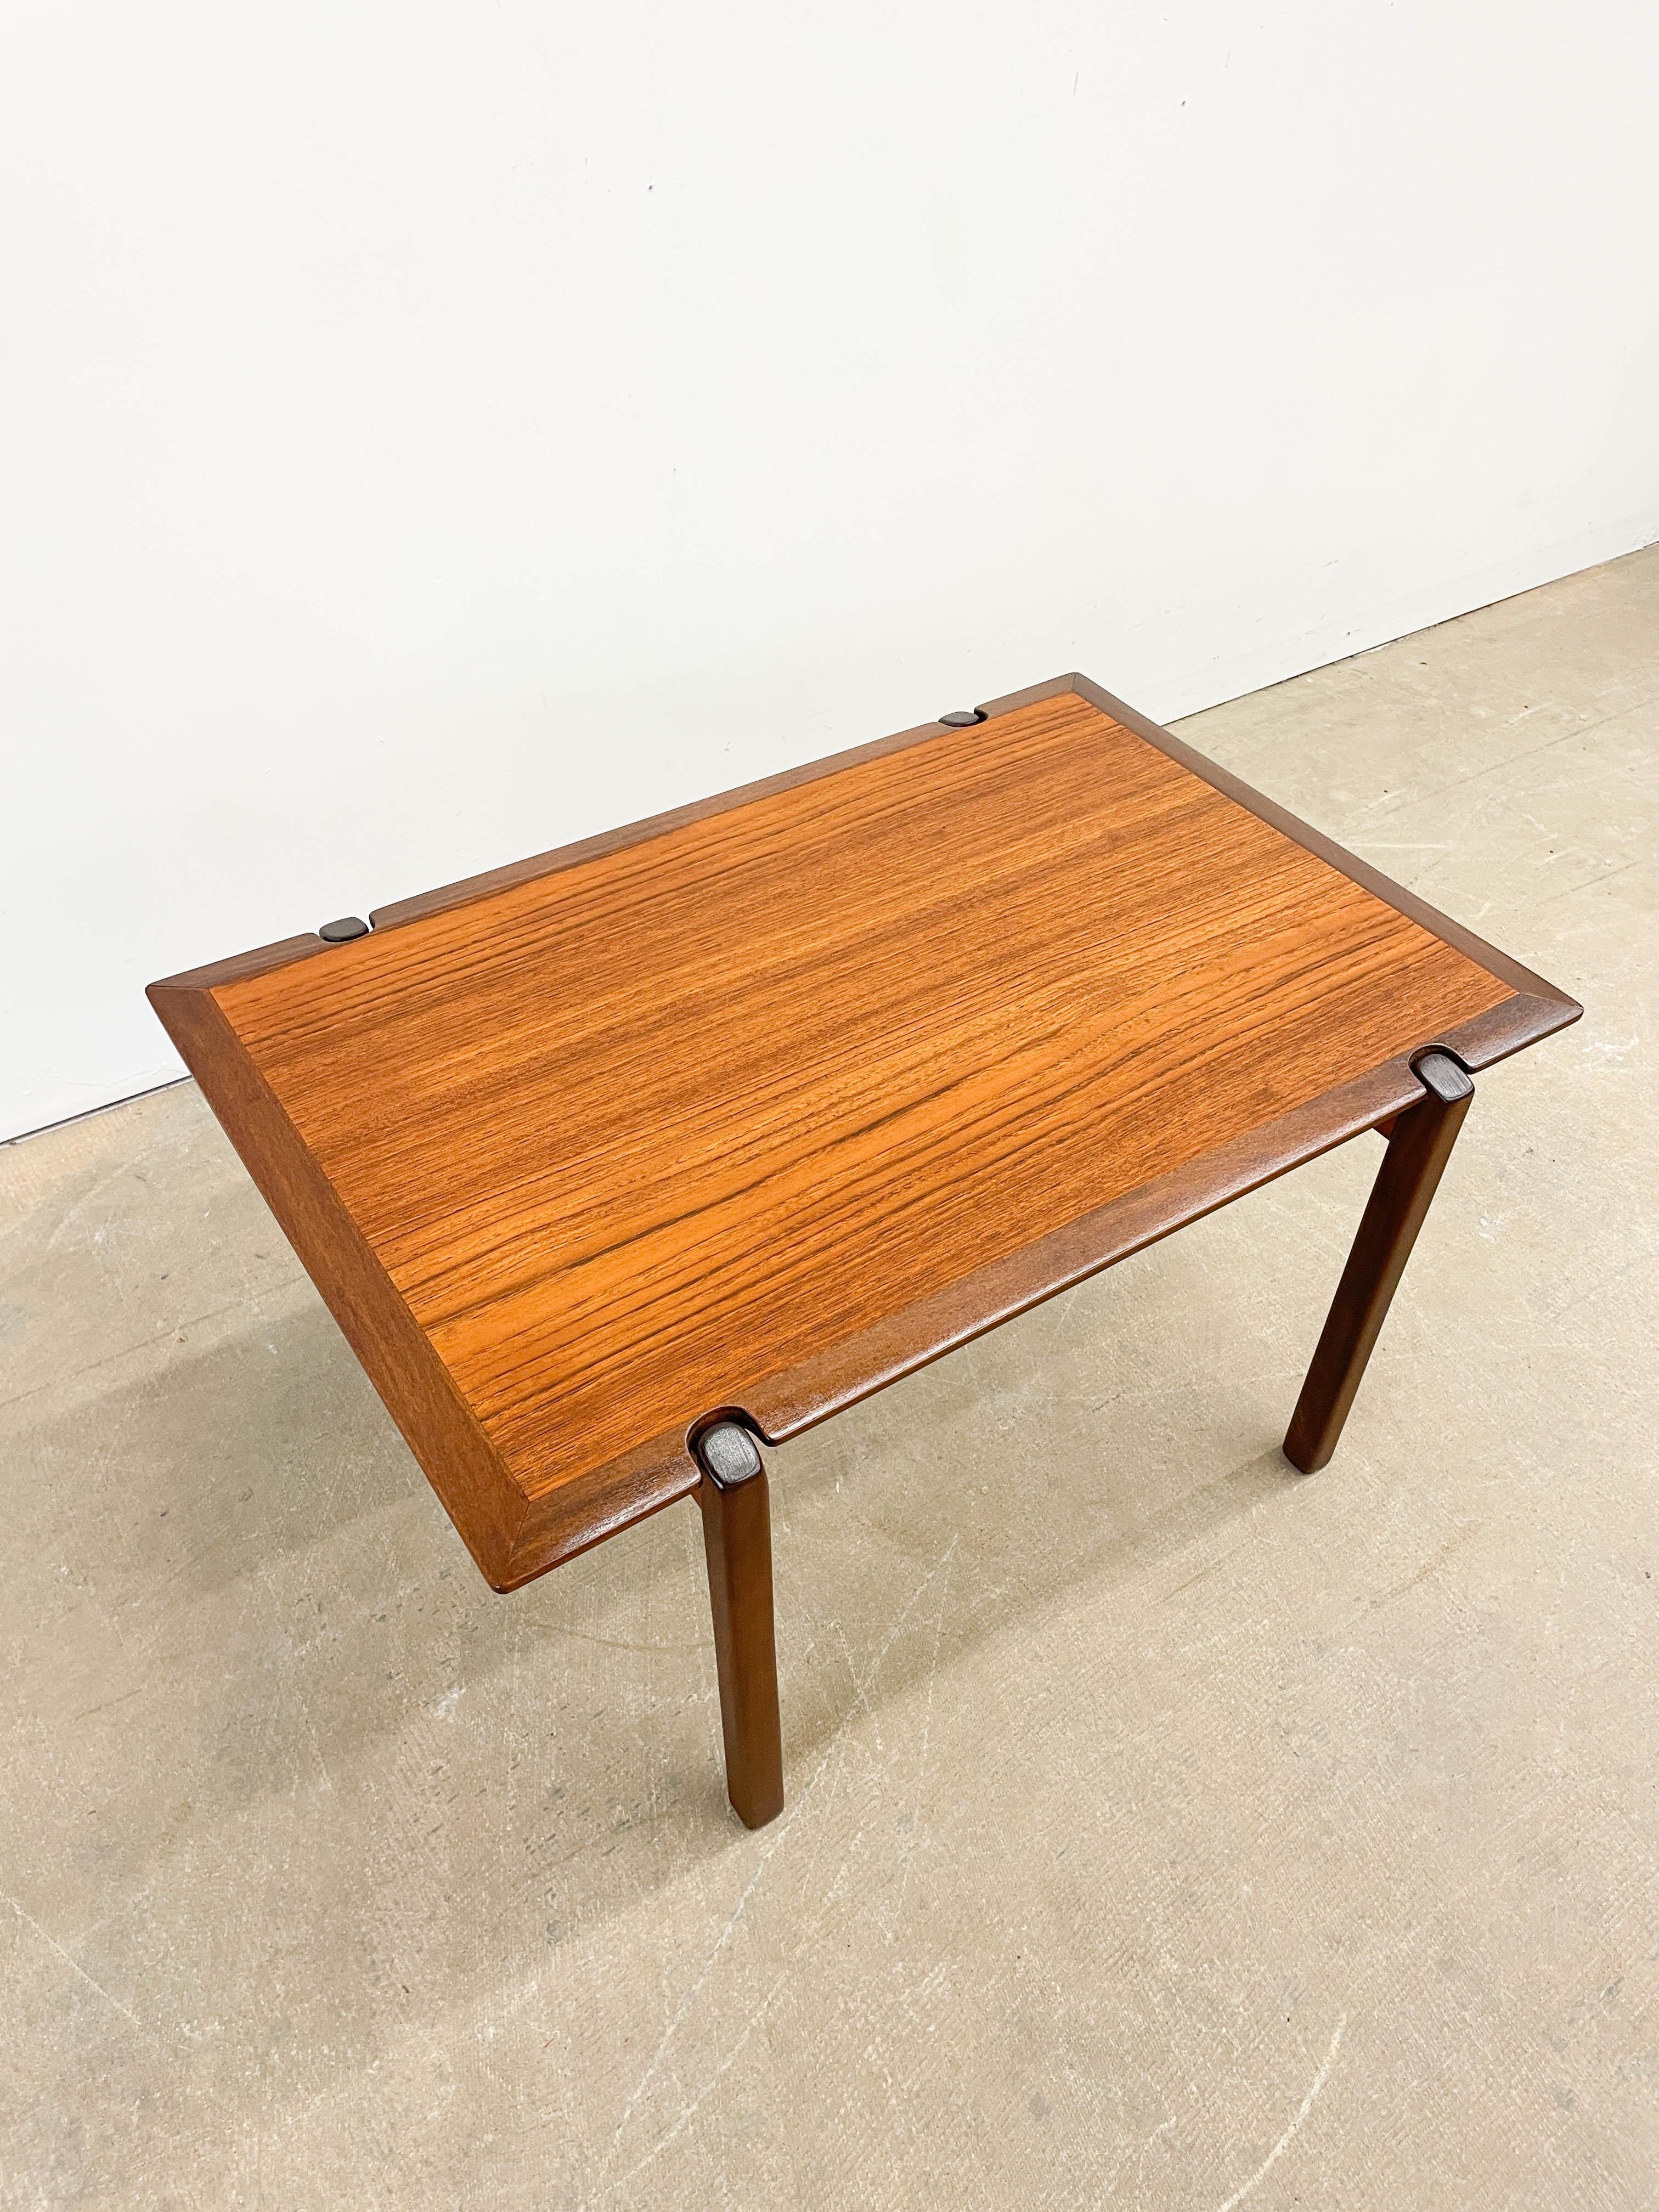 Beautiful teak grain side table with a sleek beveled edge perimeter made in Denmark. Great as a side, end or occasional table with a gorgeous Teak grain that shows through a clear lacquer finish. Very interesting profuile with the beveled knife edge